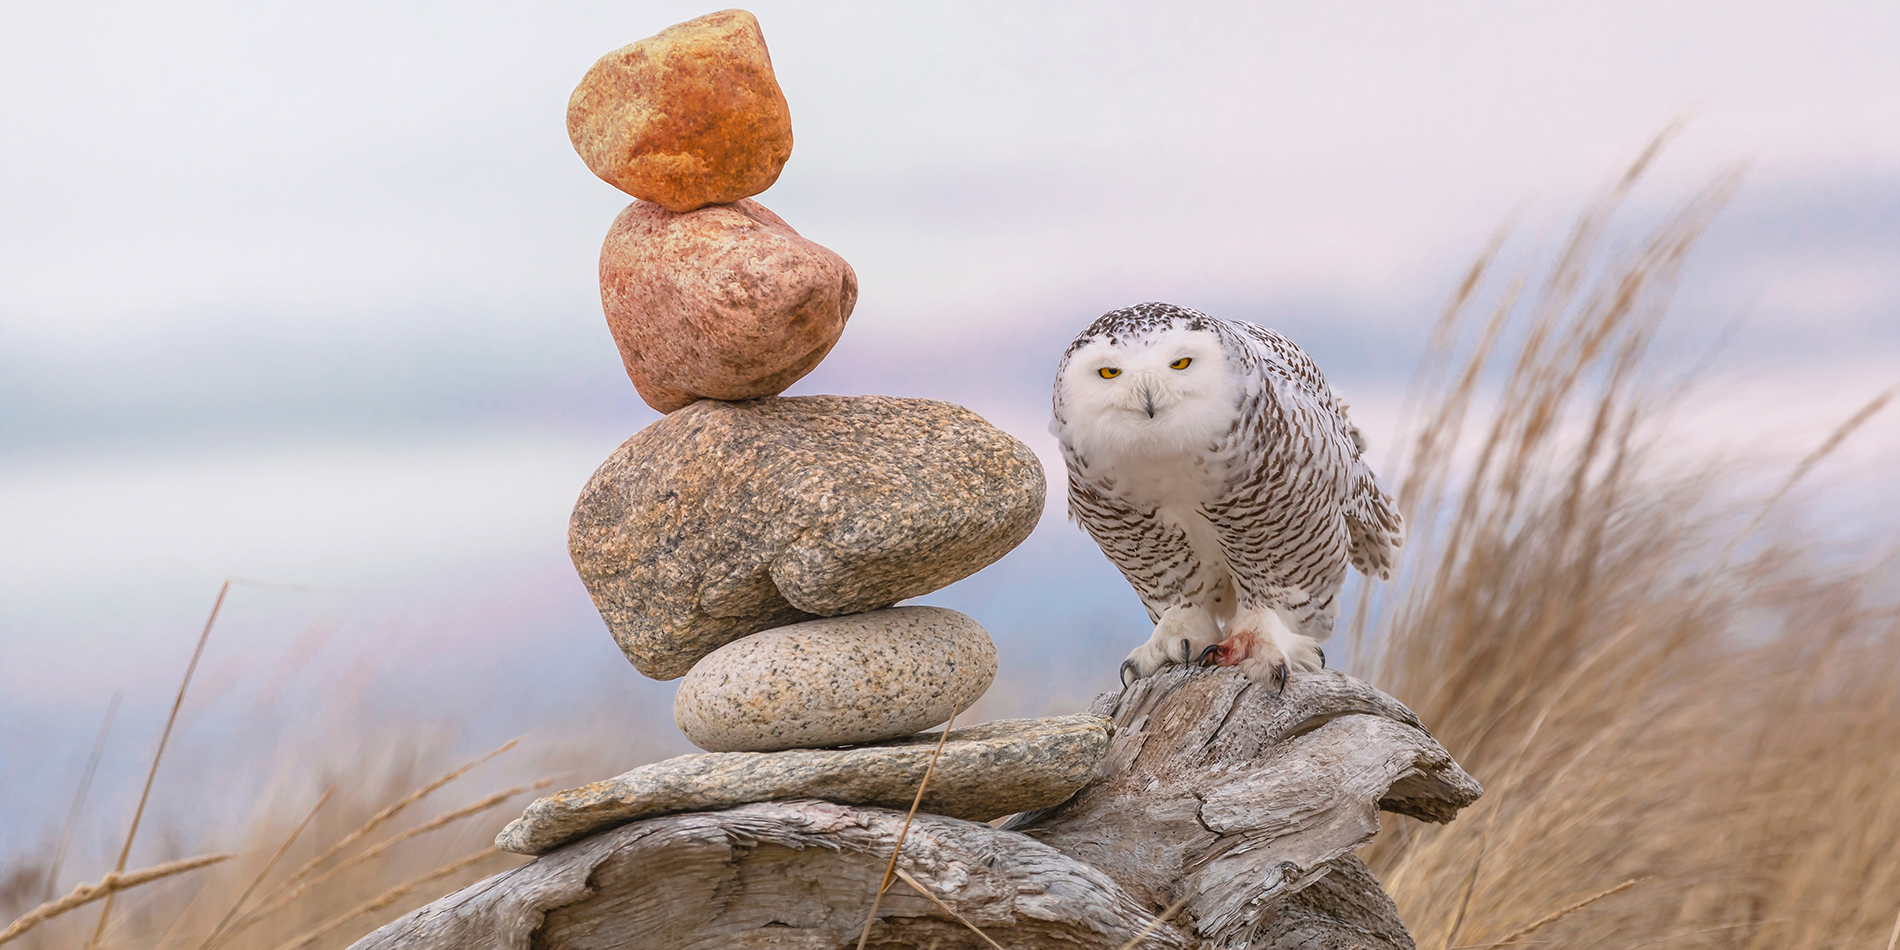 Snowy Owl perched on rocks. 2023 Grand Prize winner of our Annual Photo Contest